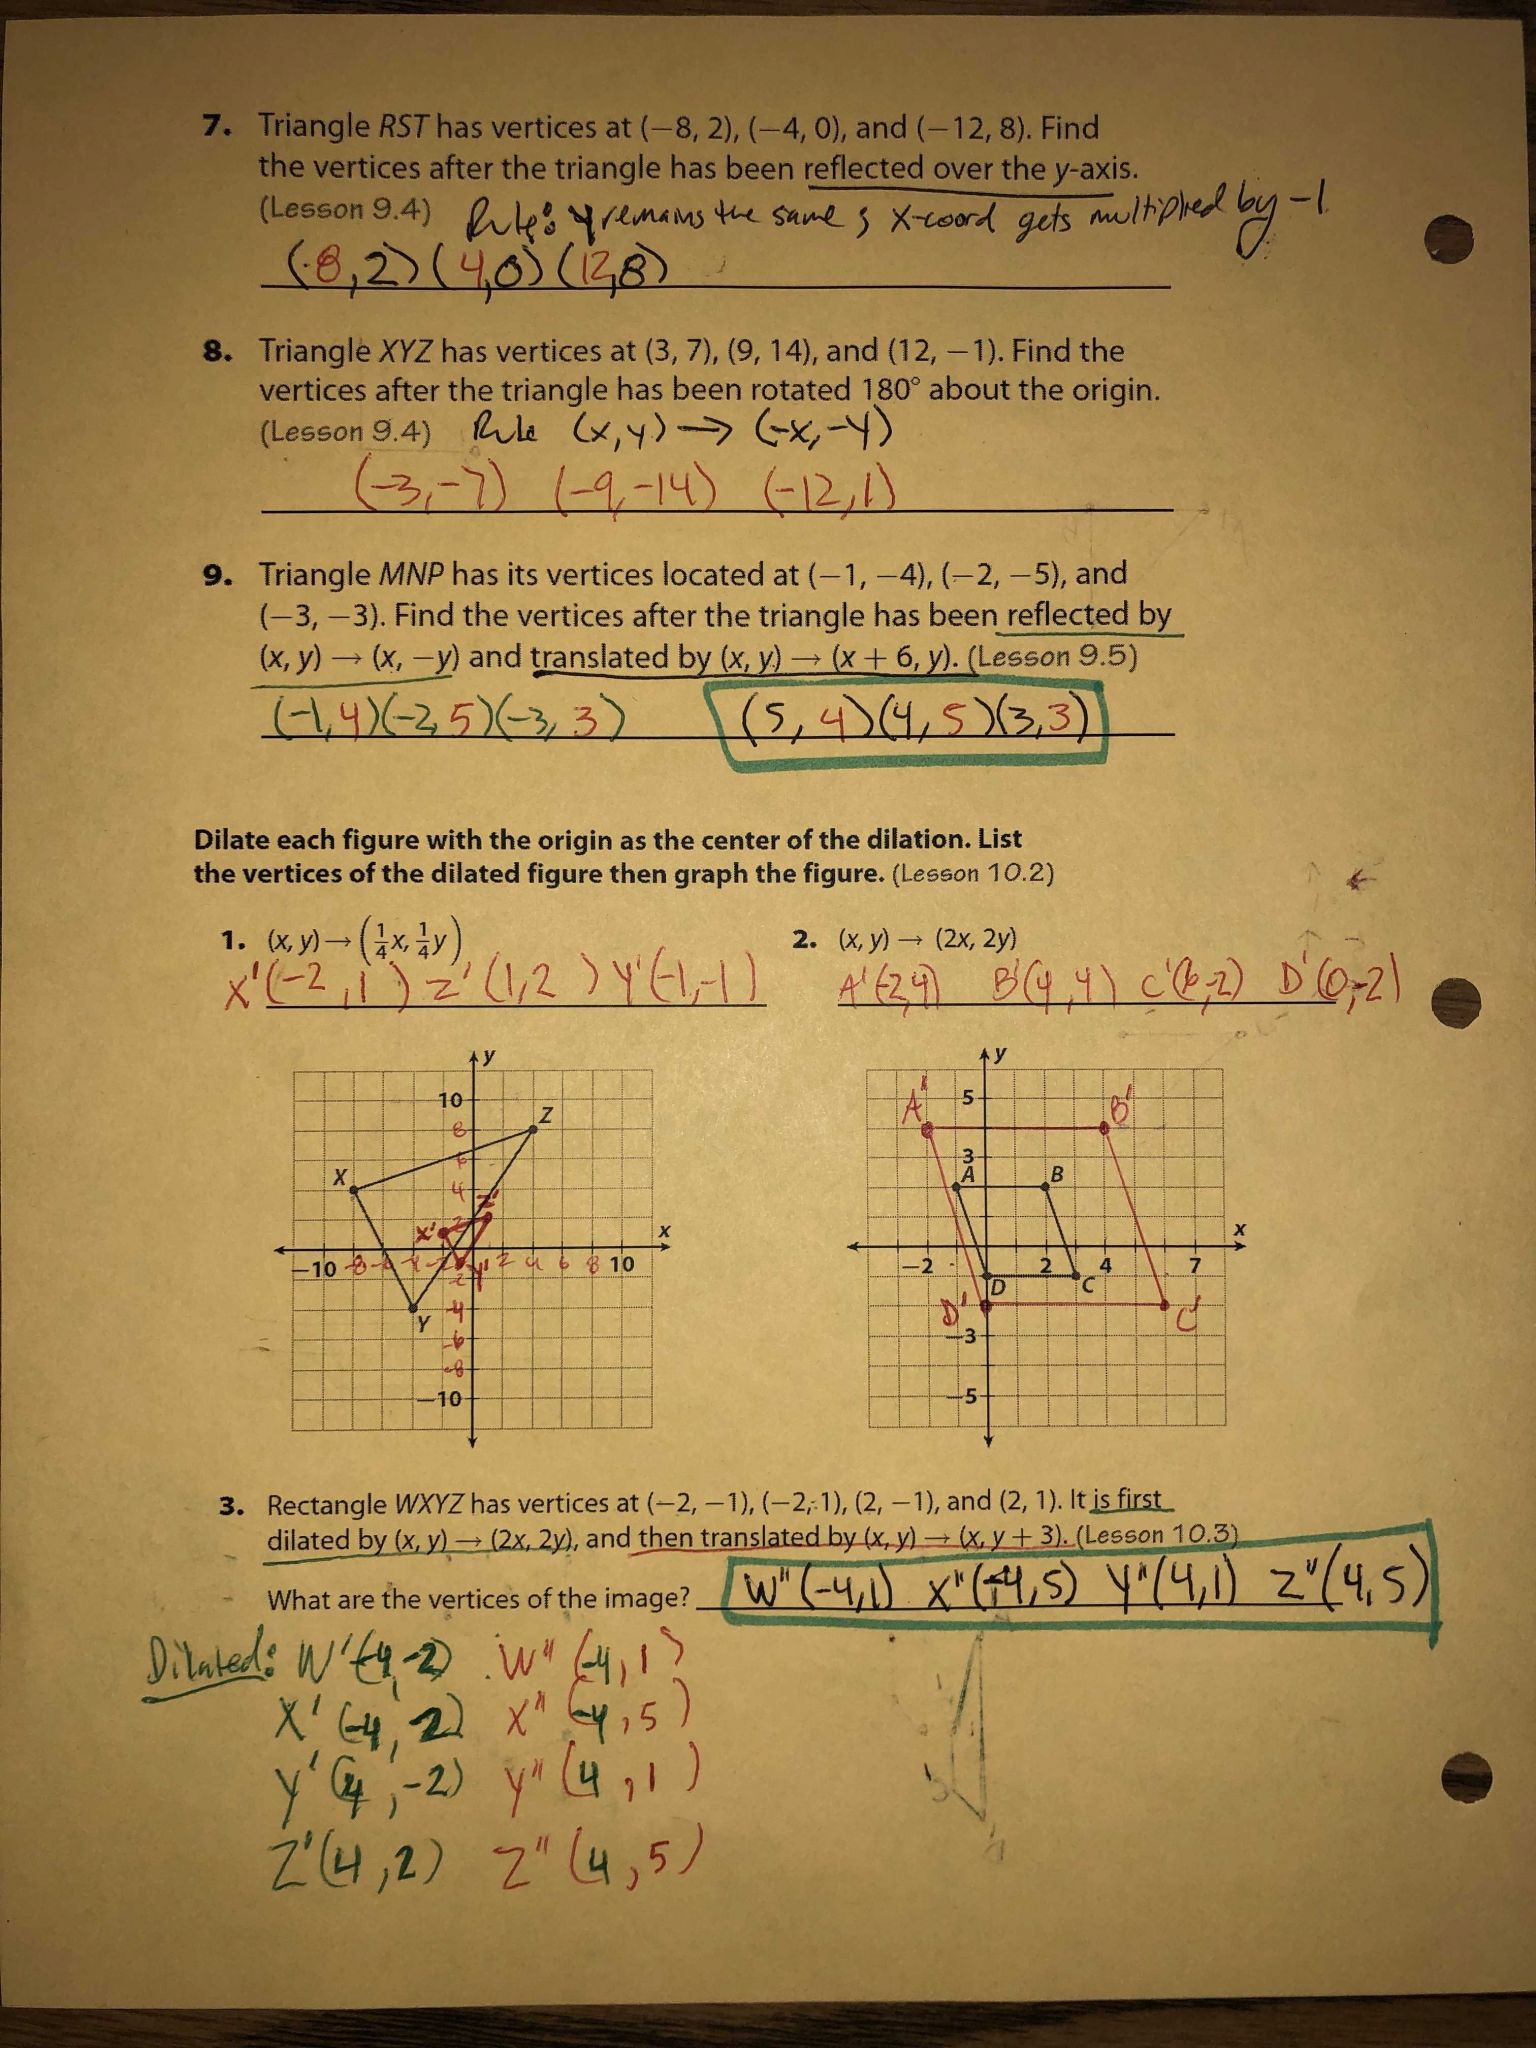 Extended Algebra 1 Functions Worksheet 4 Answers Along with Adams Middle School